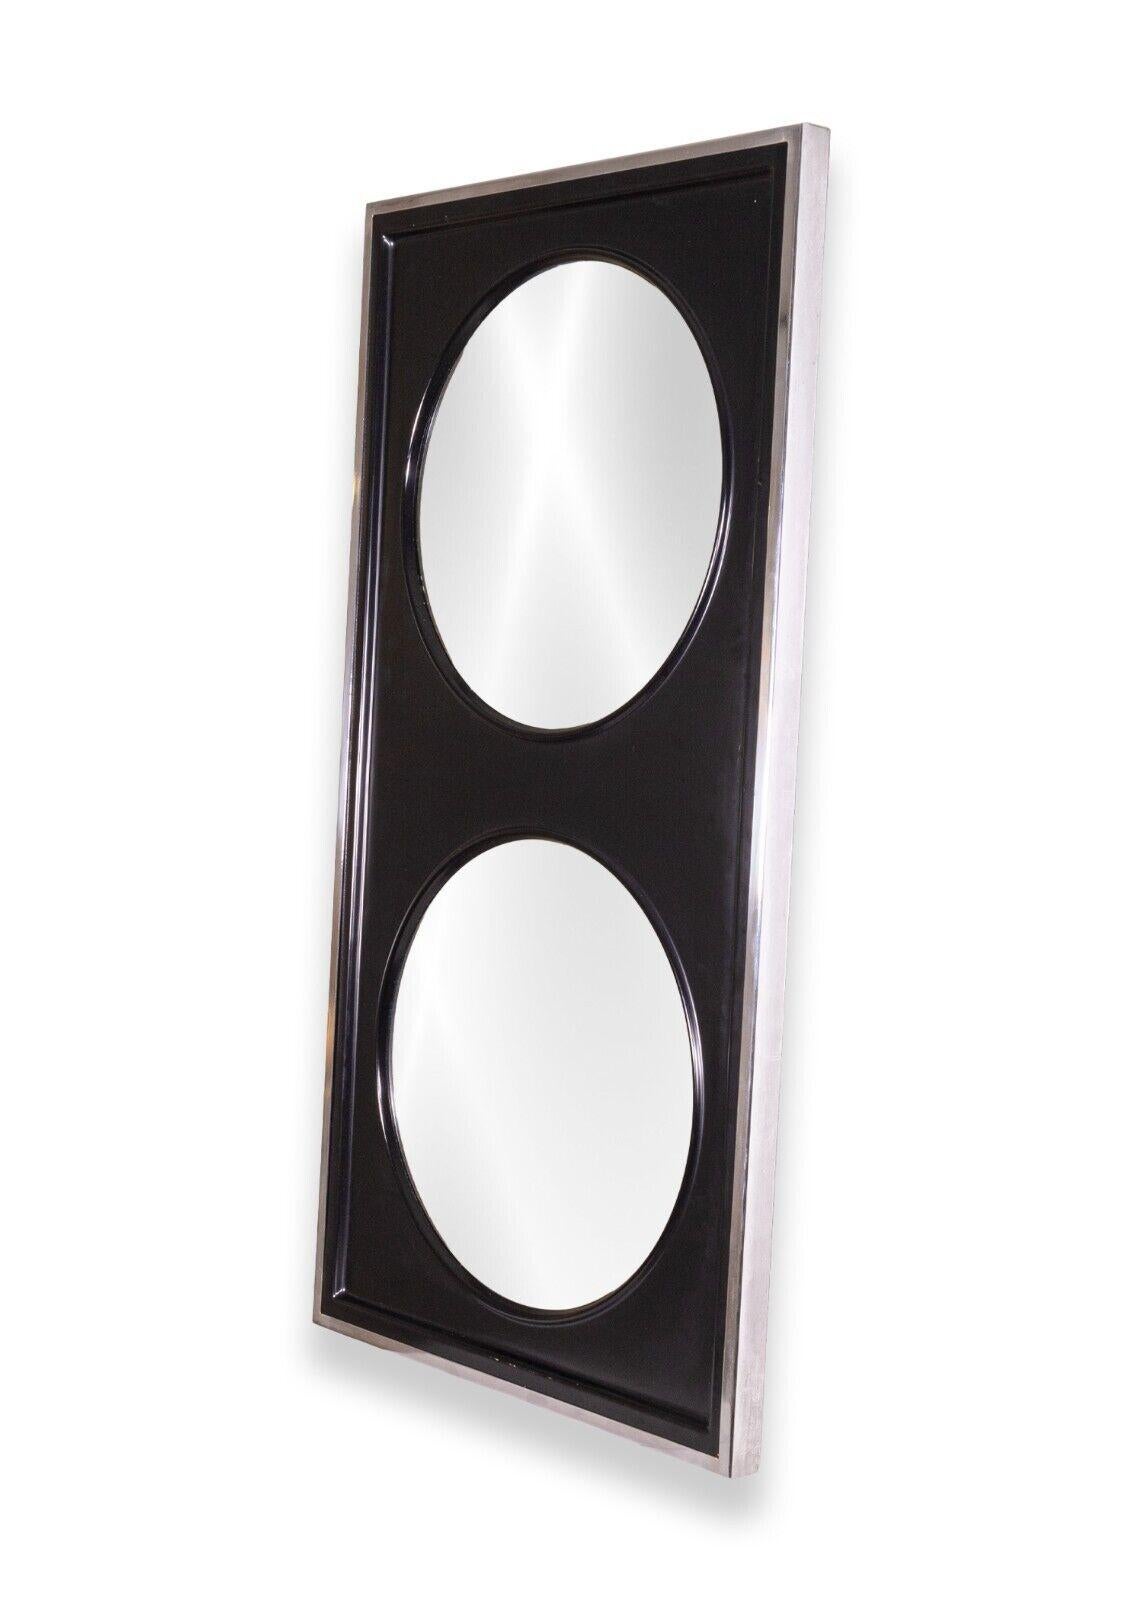 A retro mod heavy custom dual mirror made in Canada. This wonderful retro mod mirror features a chrome metal frame, a matte black face with raised bevels, and a dual mirror design. This piece is wired to be hung horizontally, but could be rearranged